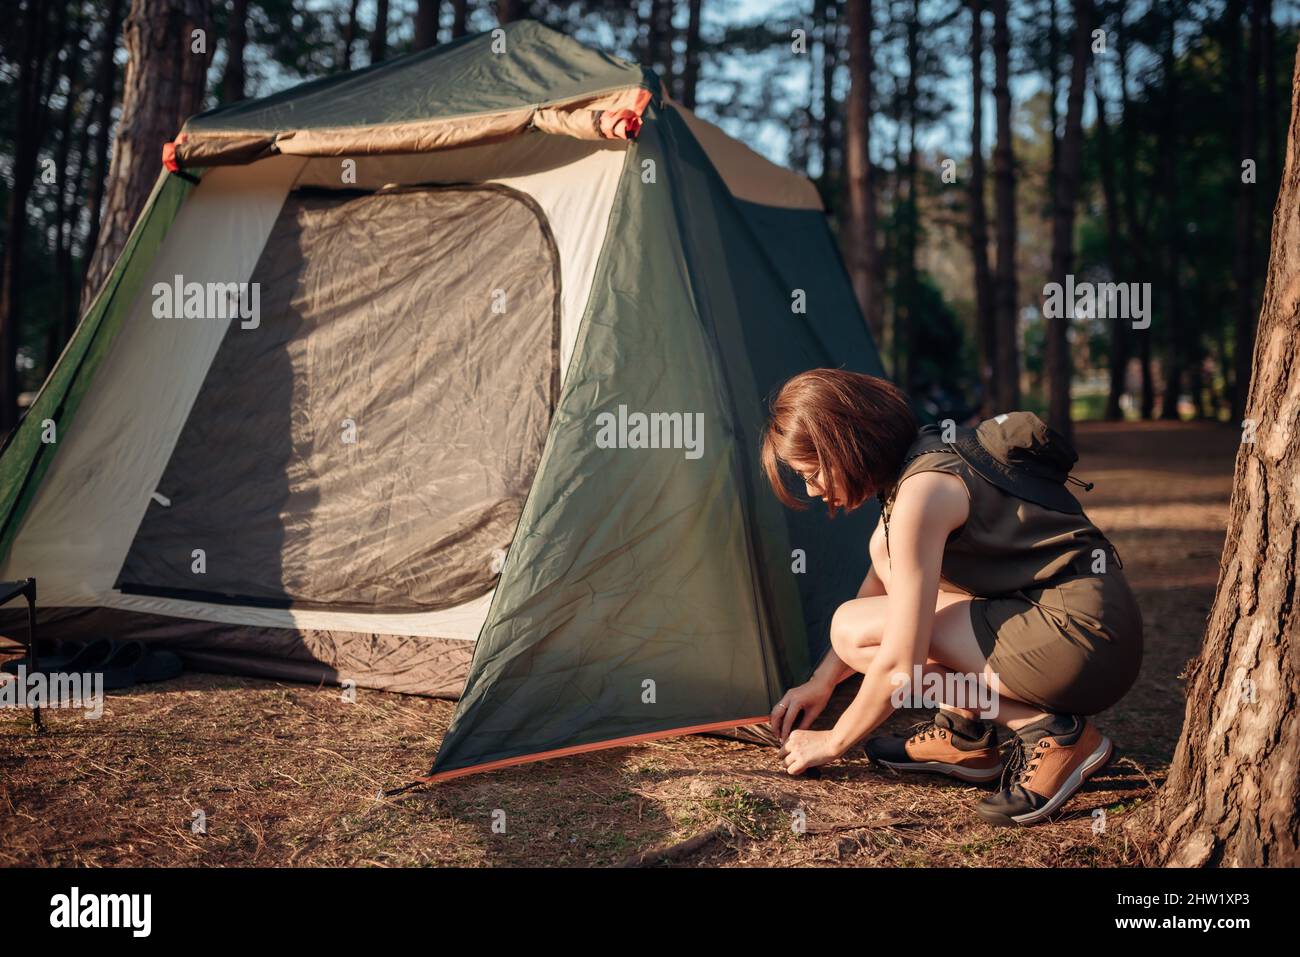 An Asian woman is pitching a tent in the pine tree forest at Pang Oung, Mae Hong Son province, Thailand. Stock Photo